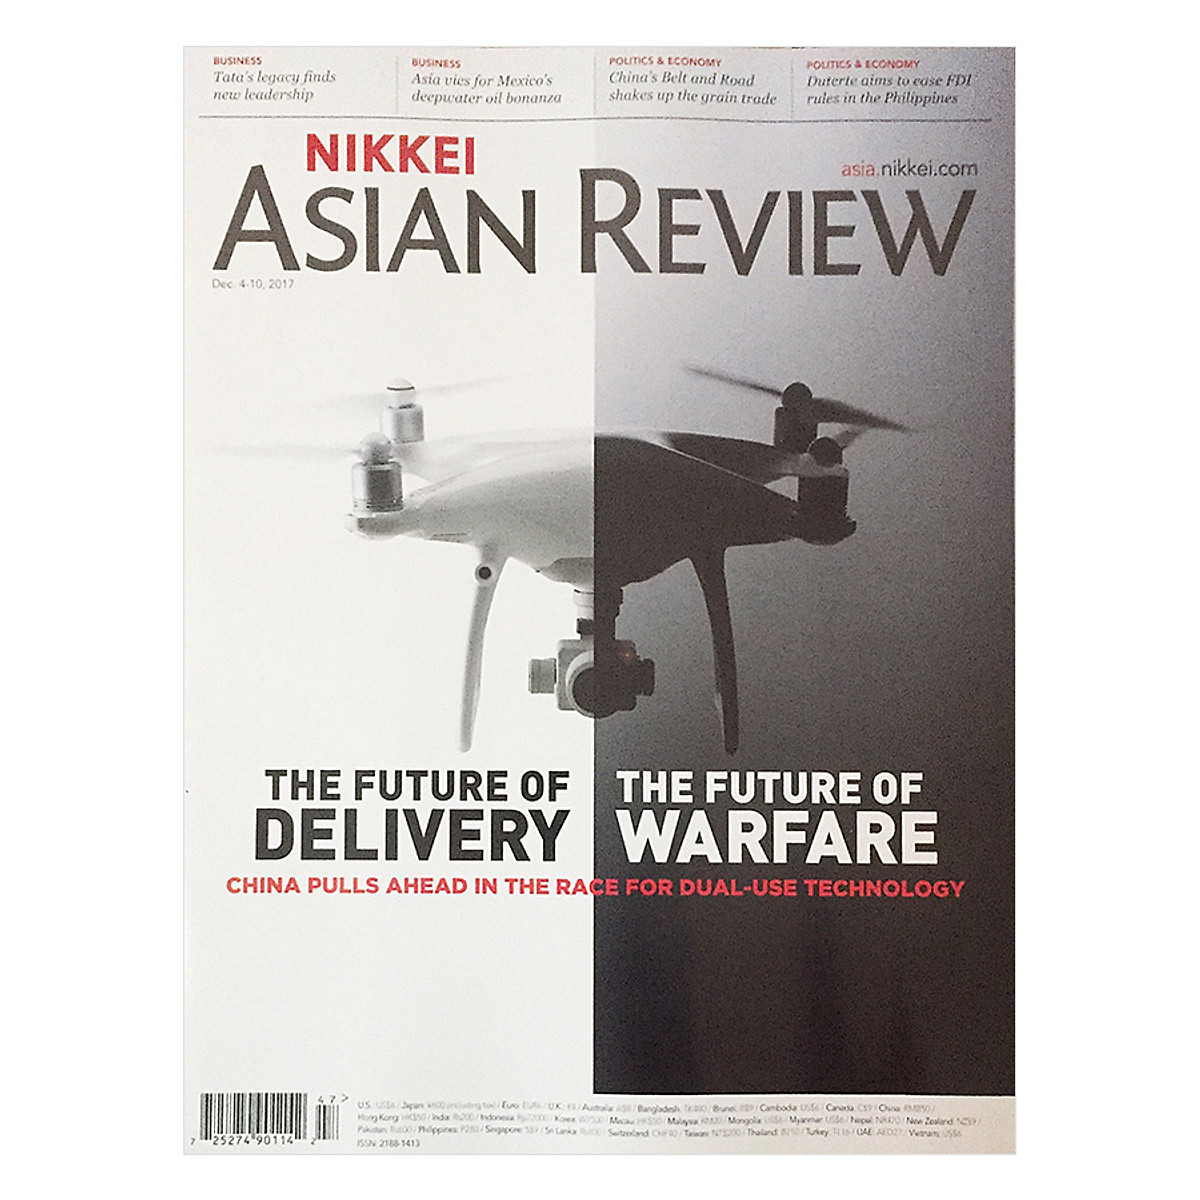 Nikkei Asian Review: The Future Of Delivery, The Future Of Warfare 47